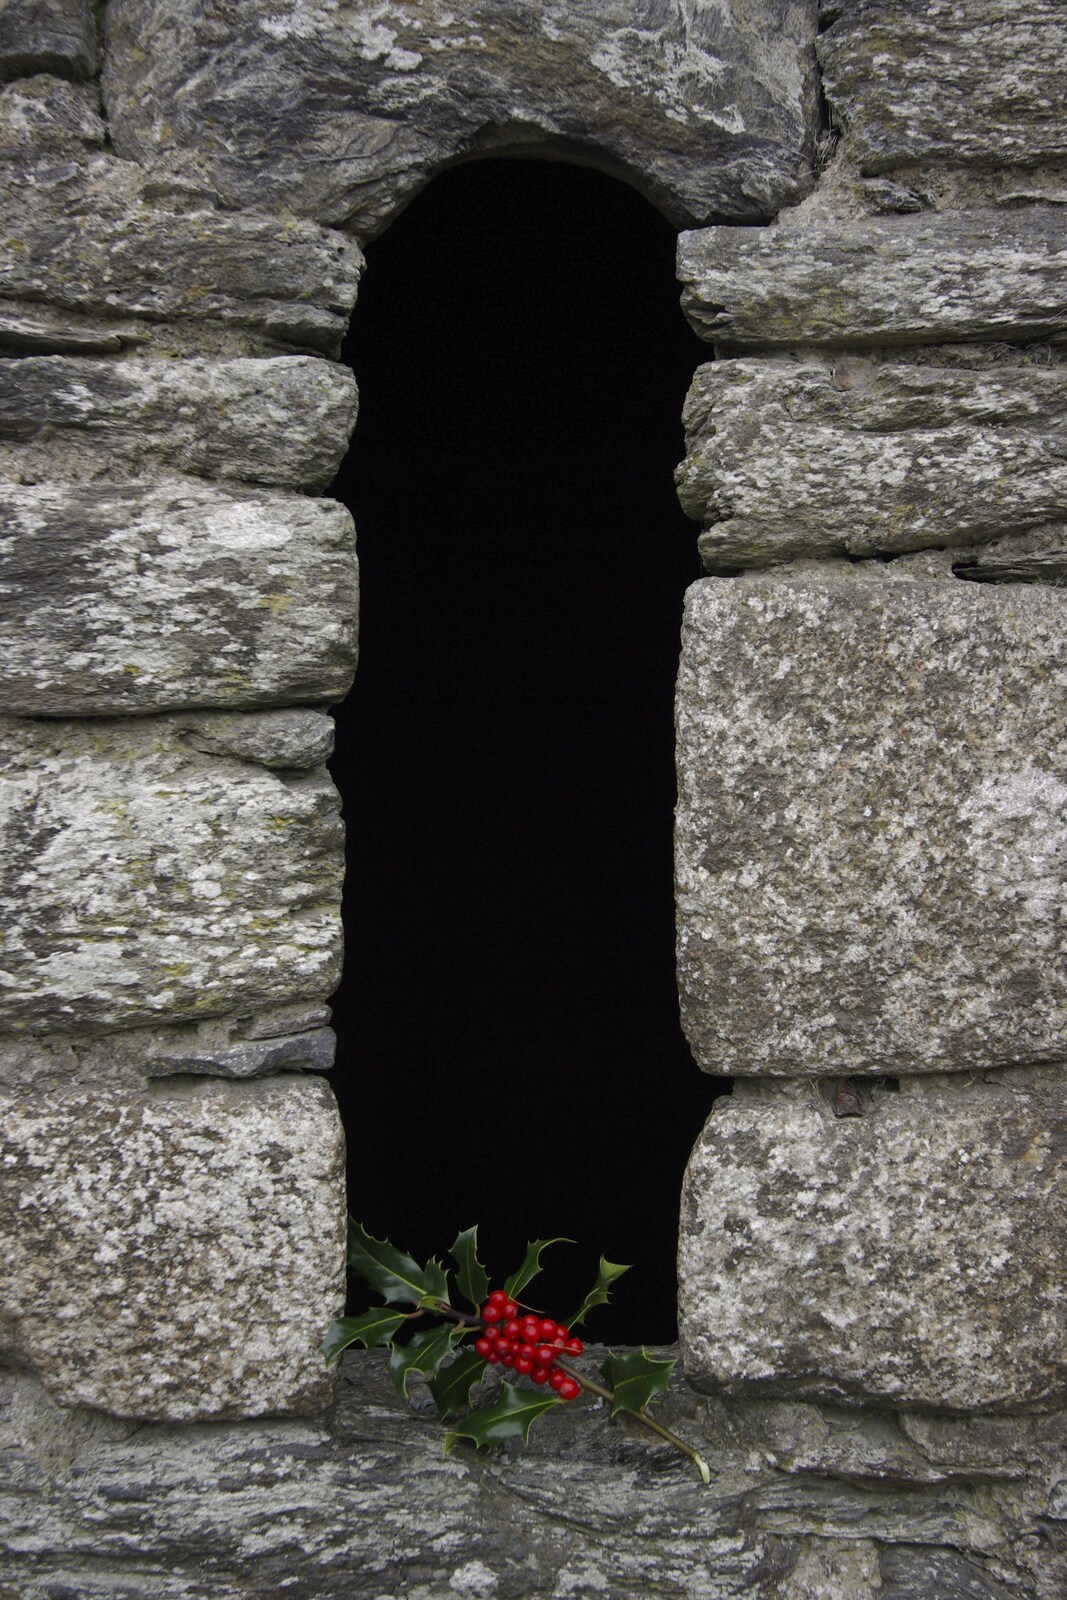 Reflections: A Day at Glendalough, County Wicklow, Ireland - 3rd November 2007: A sprig of holly in the ruins of a priest's house